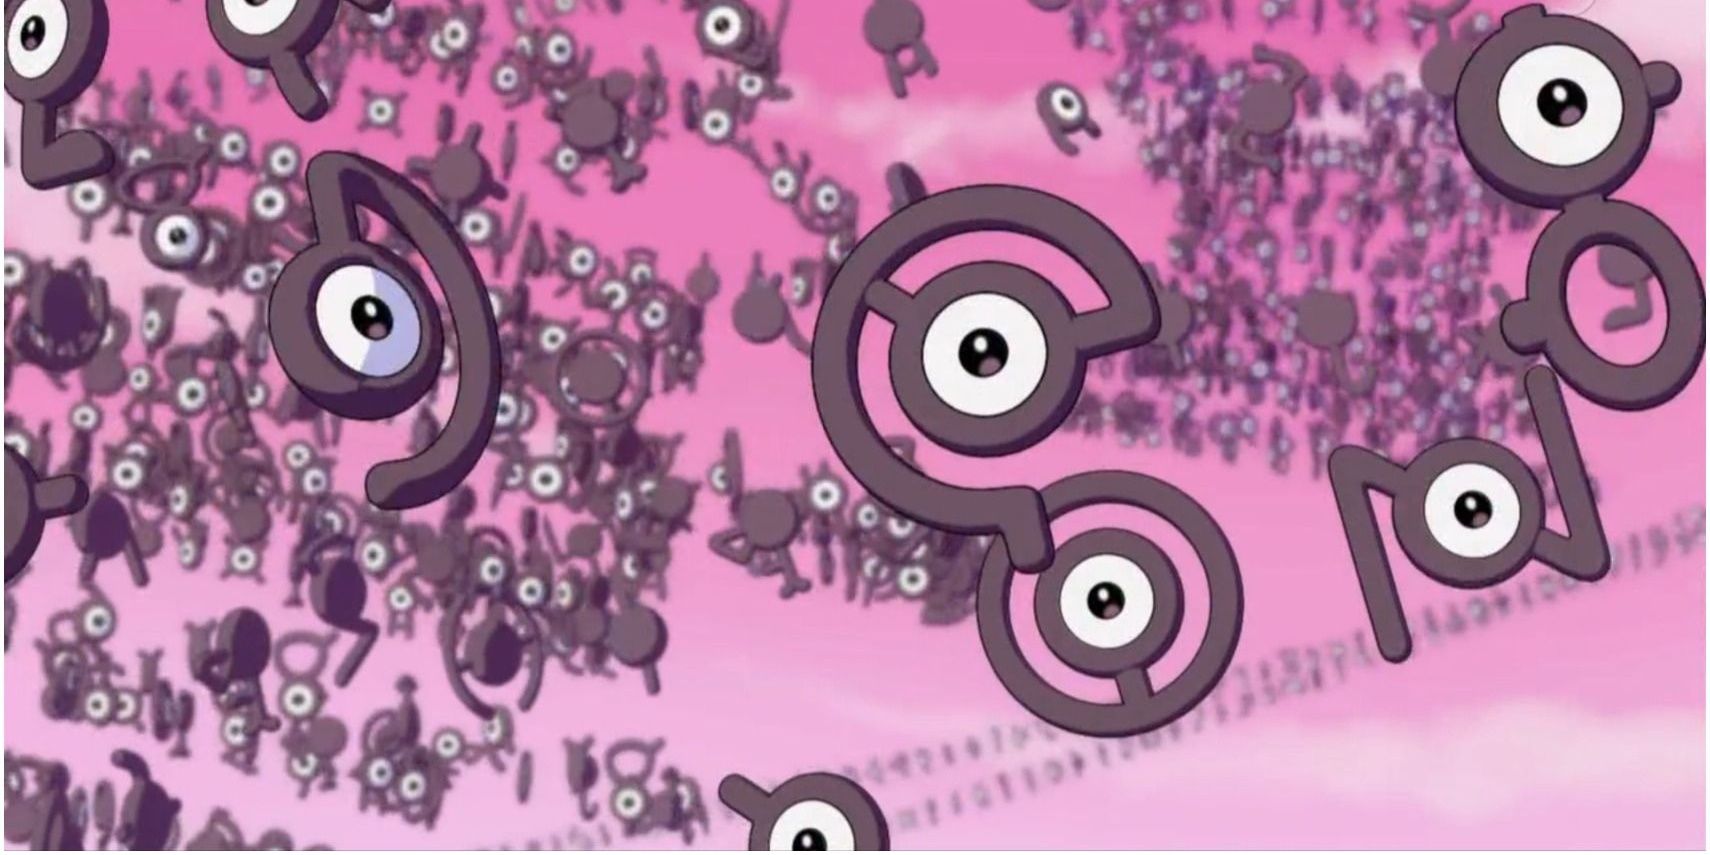 A swarm of Unown in the Pokemon anime